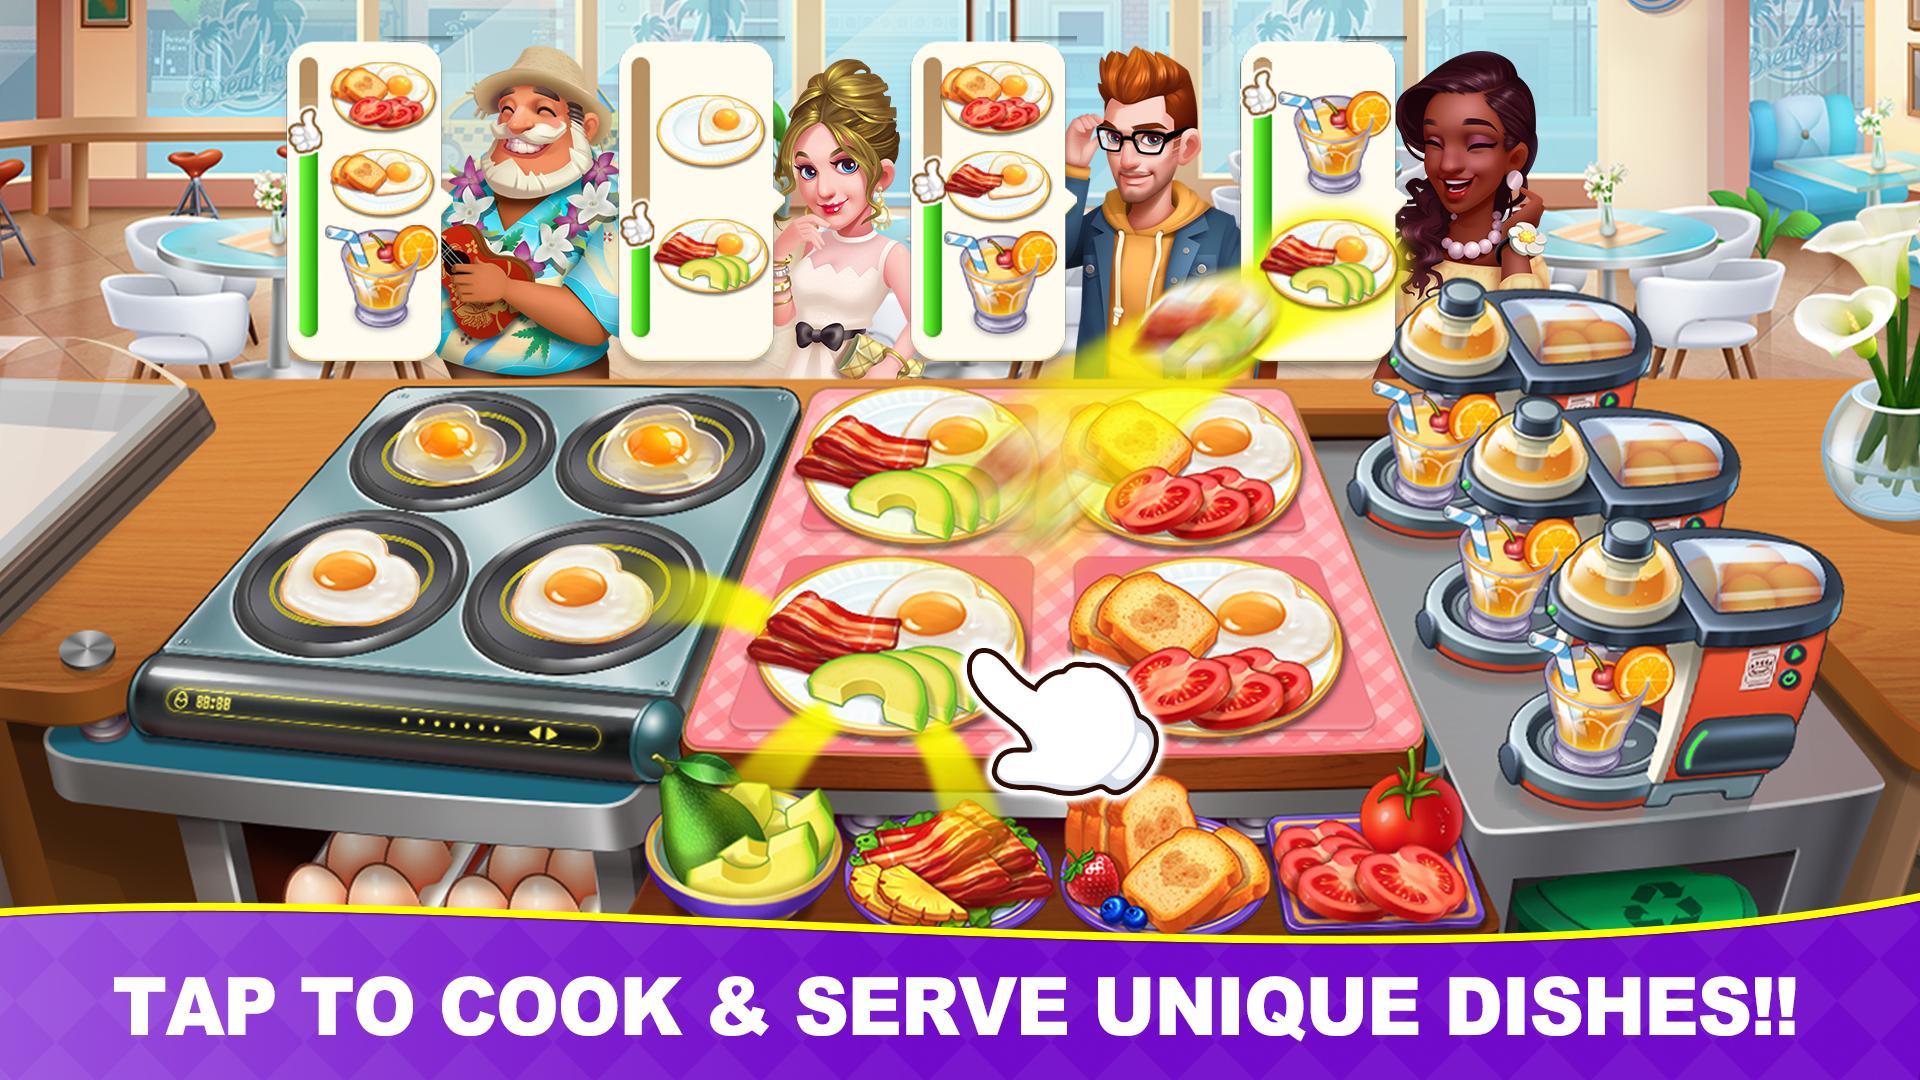 Screenshot 1 of Cooking Frenzy: Madness Crazy Chef Cooking Games 1.0.85